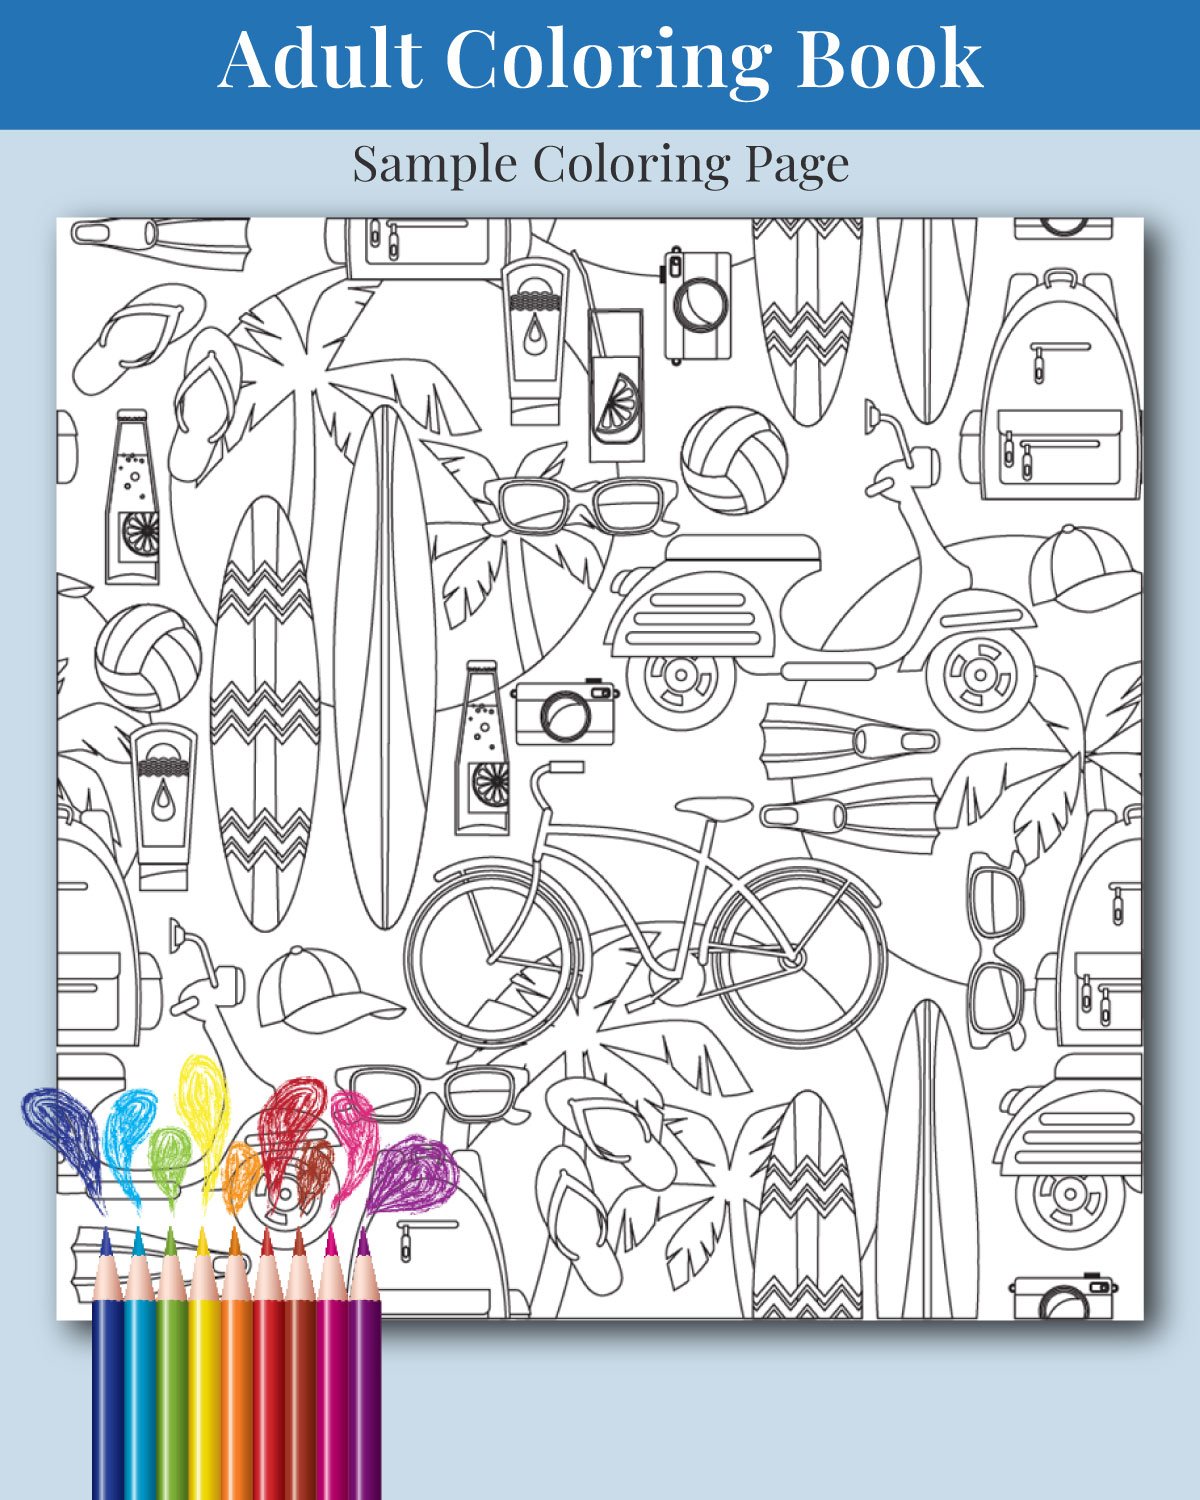 Surfs-Up-Dude-Adult-Coloring-Book-Sample-02